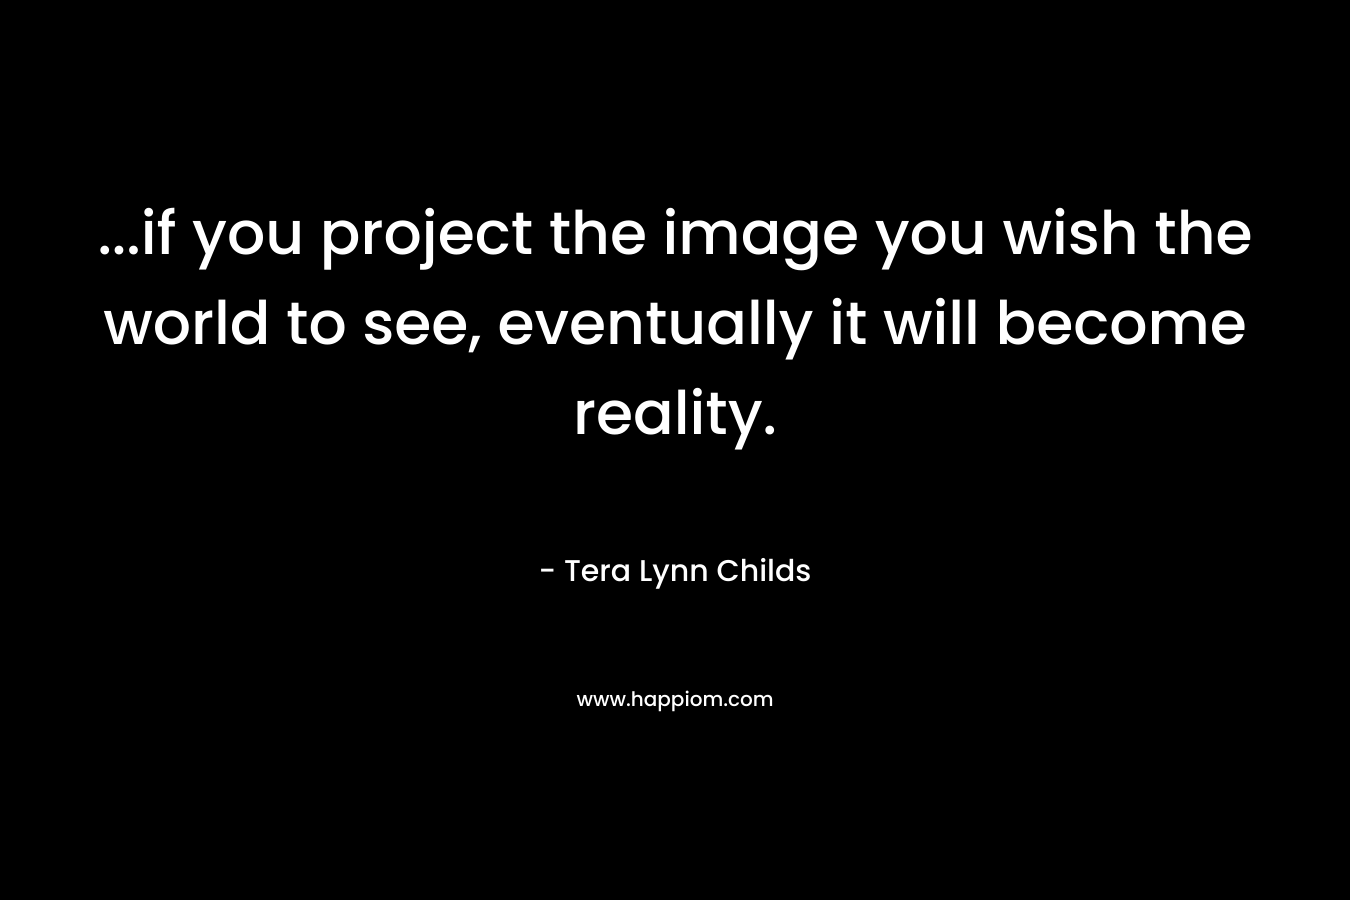 ...if you project the image you wish the world to see, eventually it will become reality.